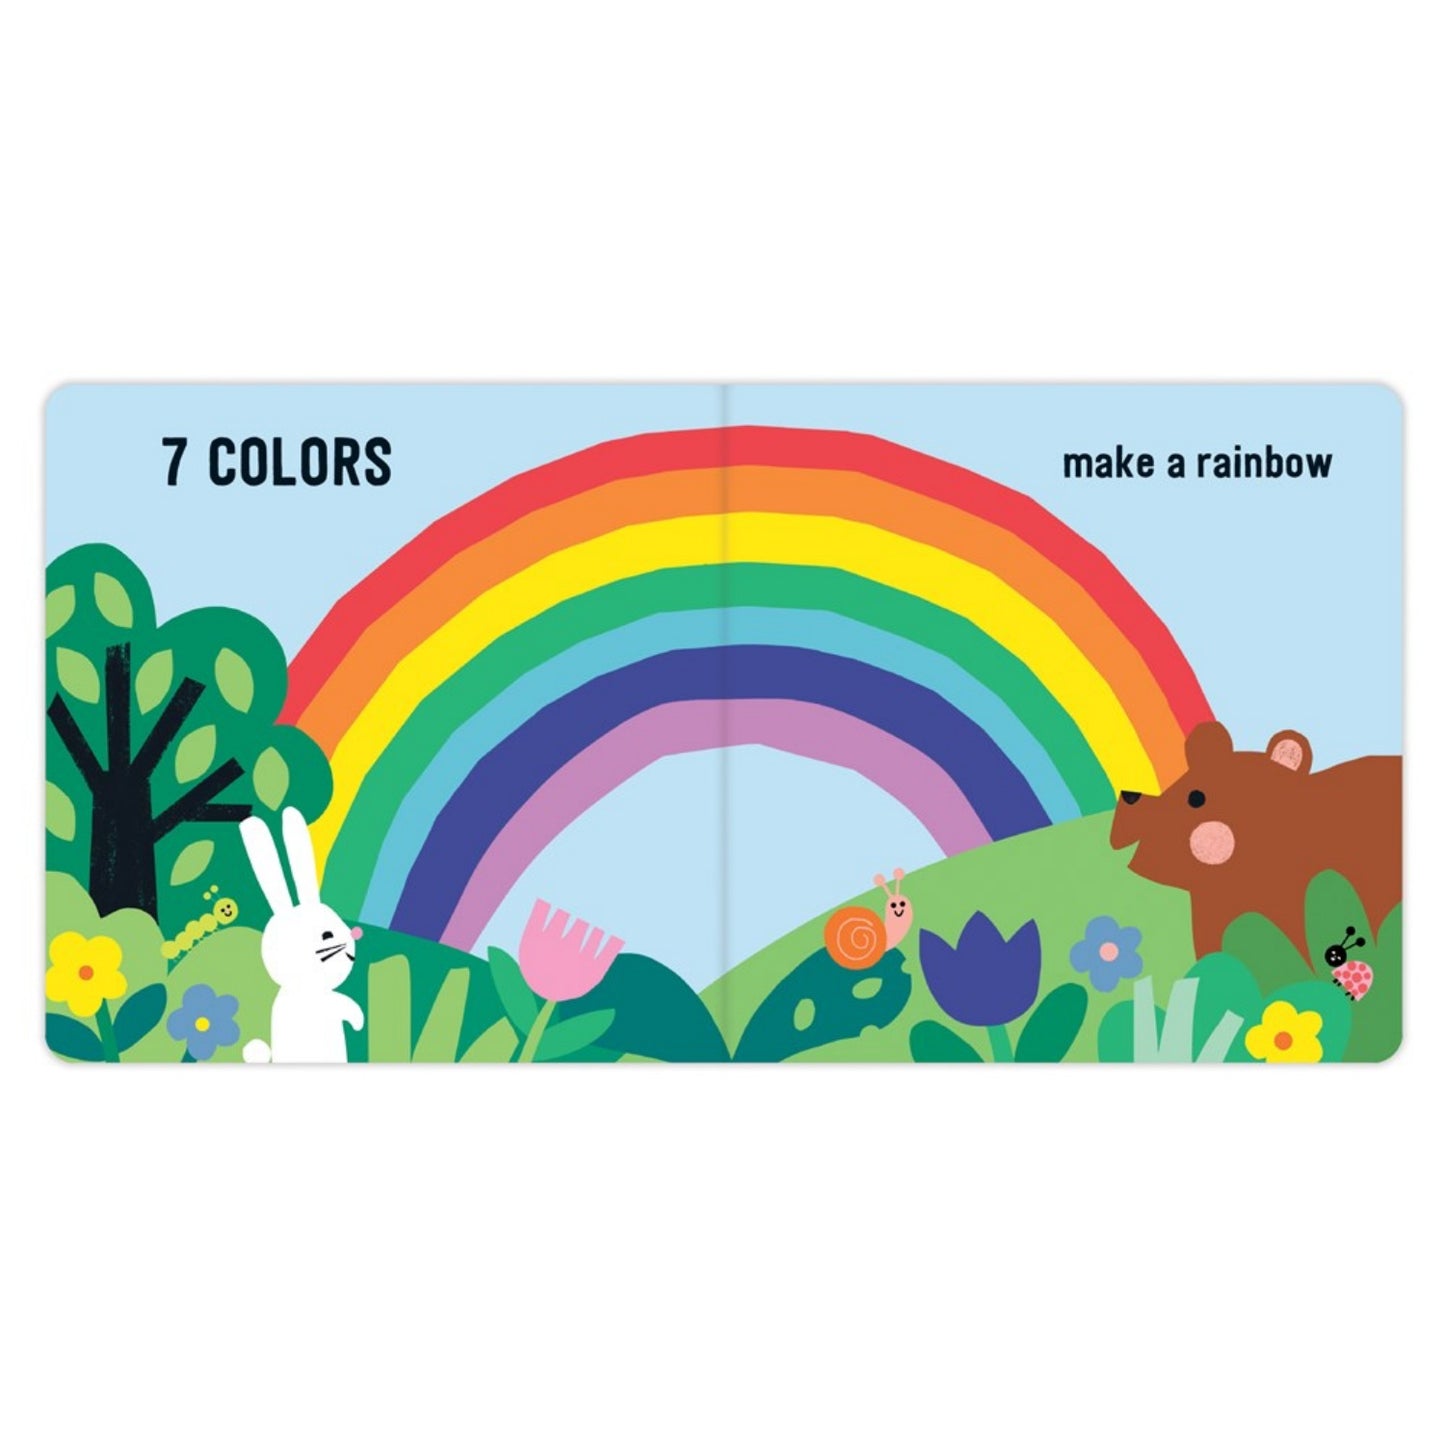 Counting on the Earth | Board Book on Nature